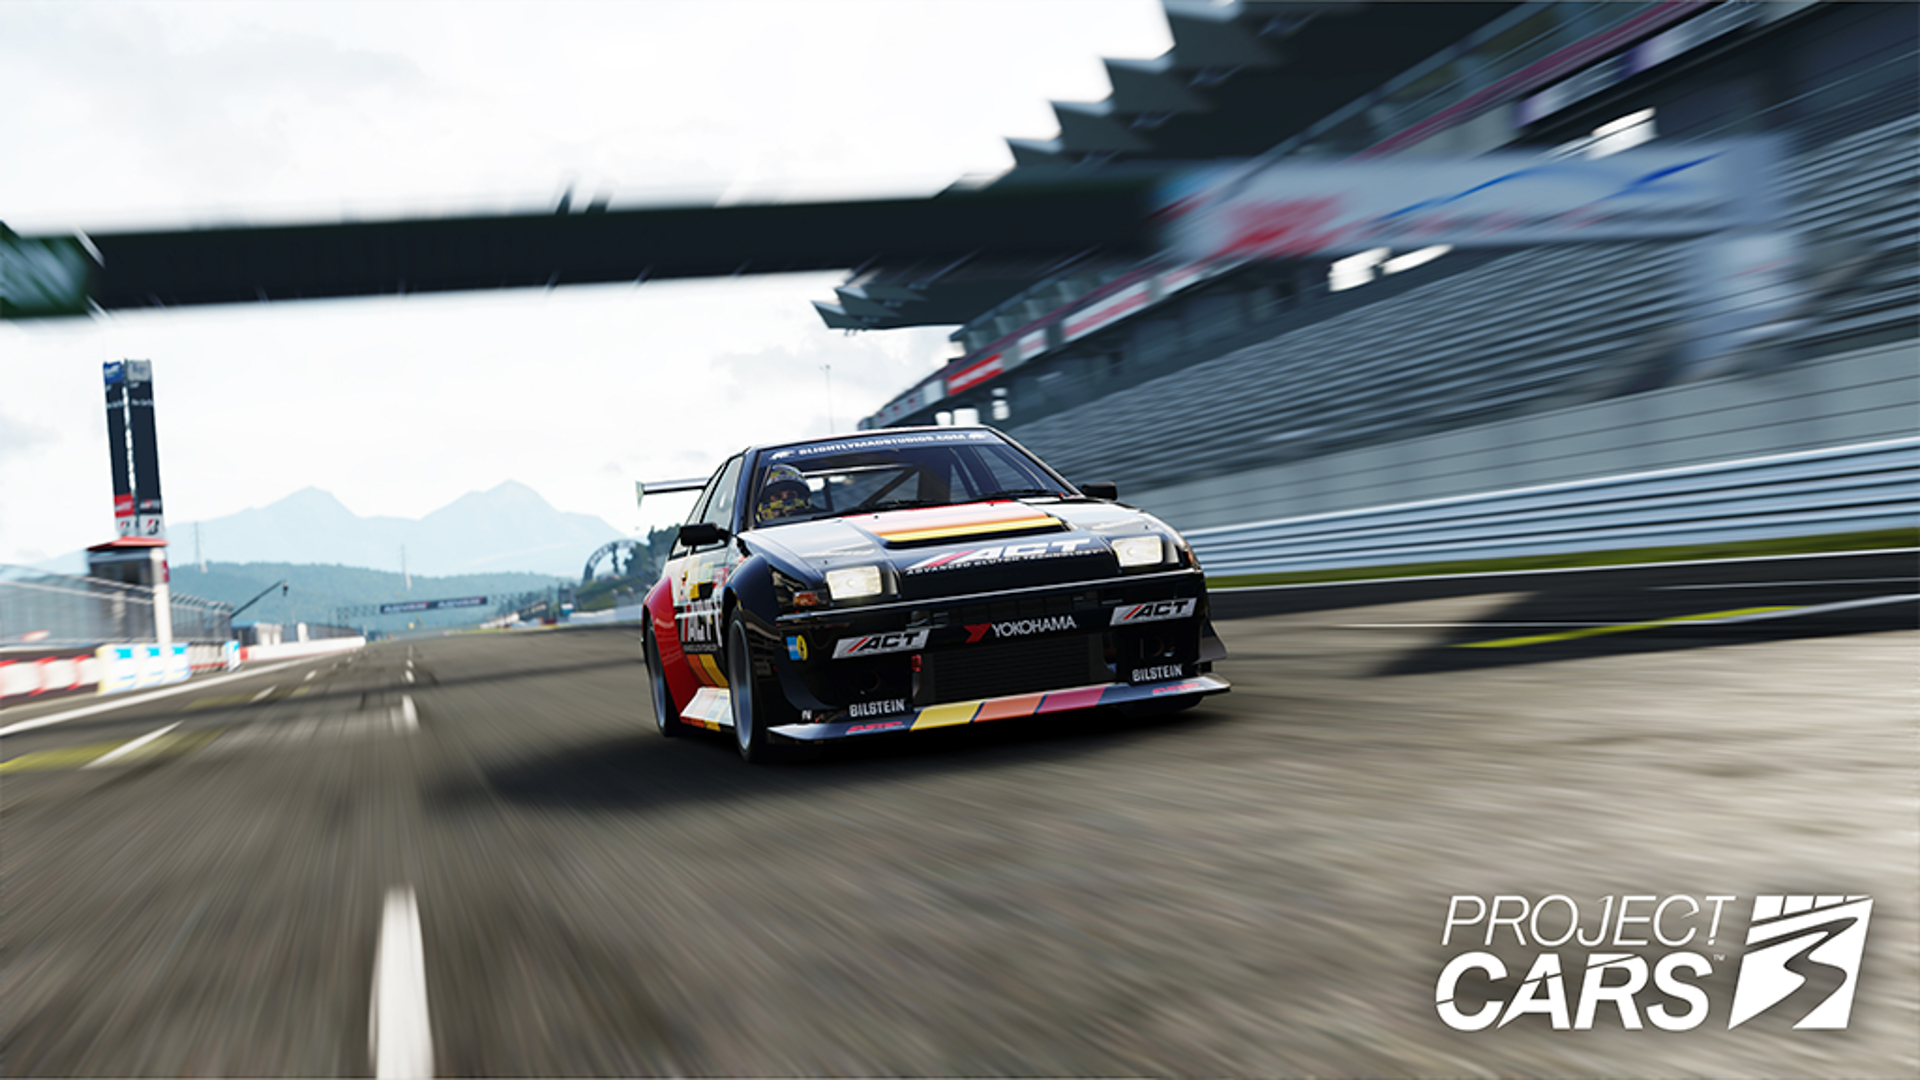 WATCH: Why did EA Kill Project CARS?